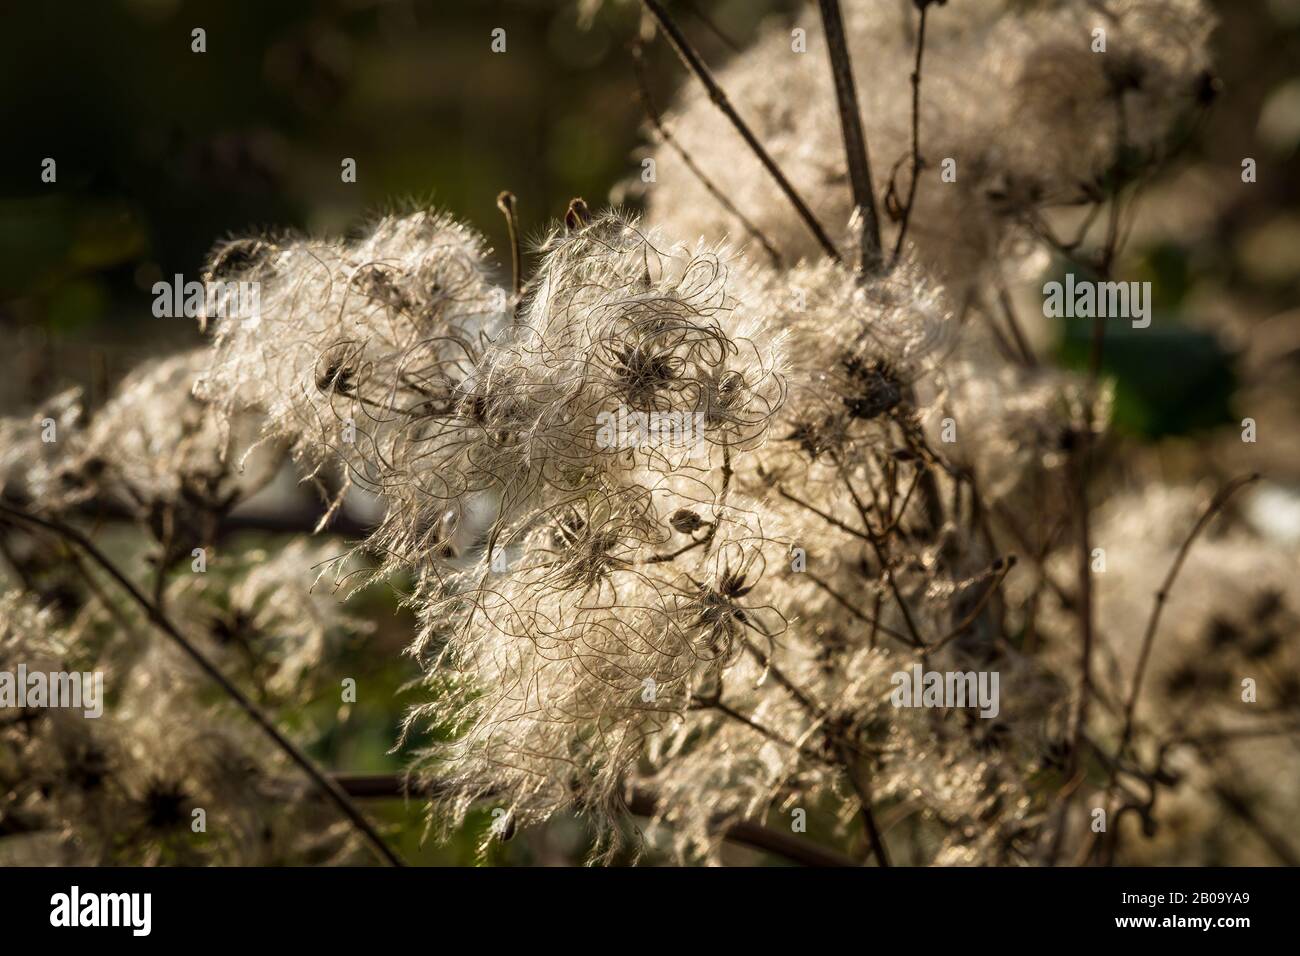 Wild Clematis seed heads of Clematis vitalba also known as Old Mans Beard or Travellers Joy. Stock Photo